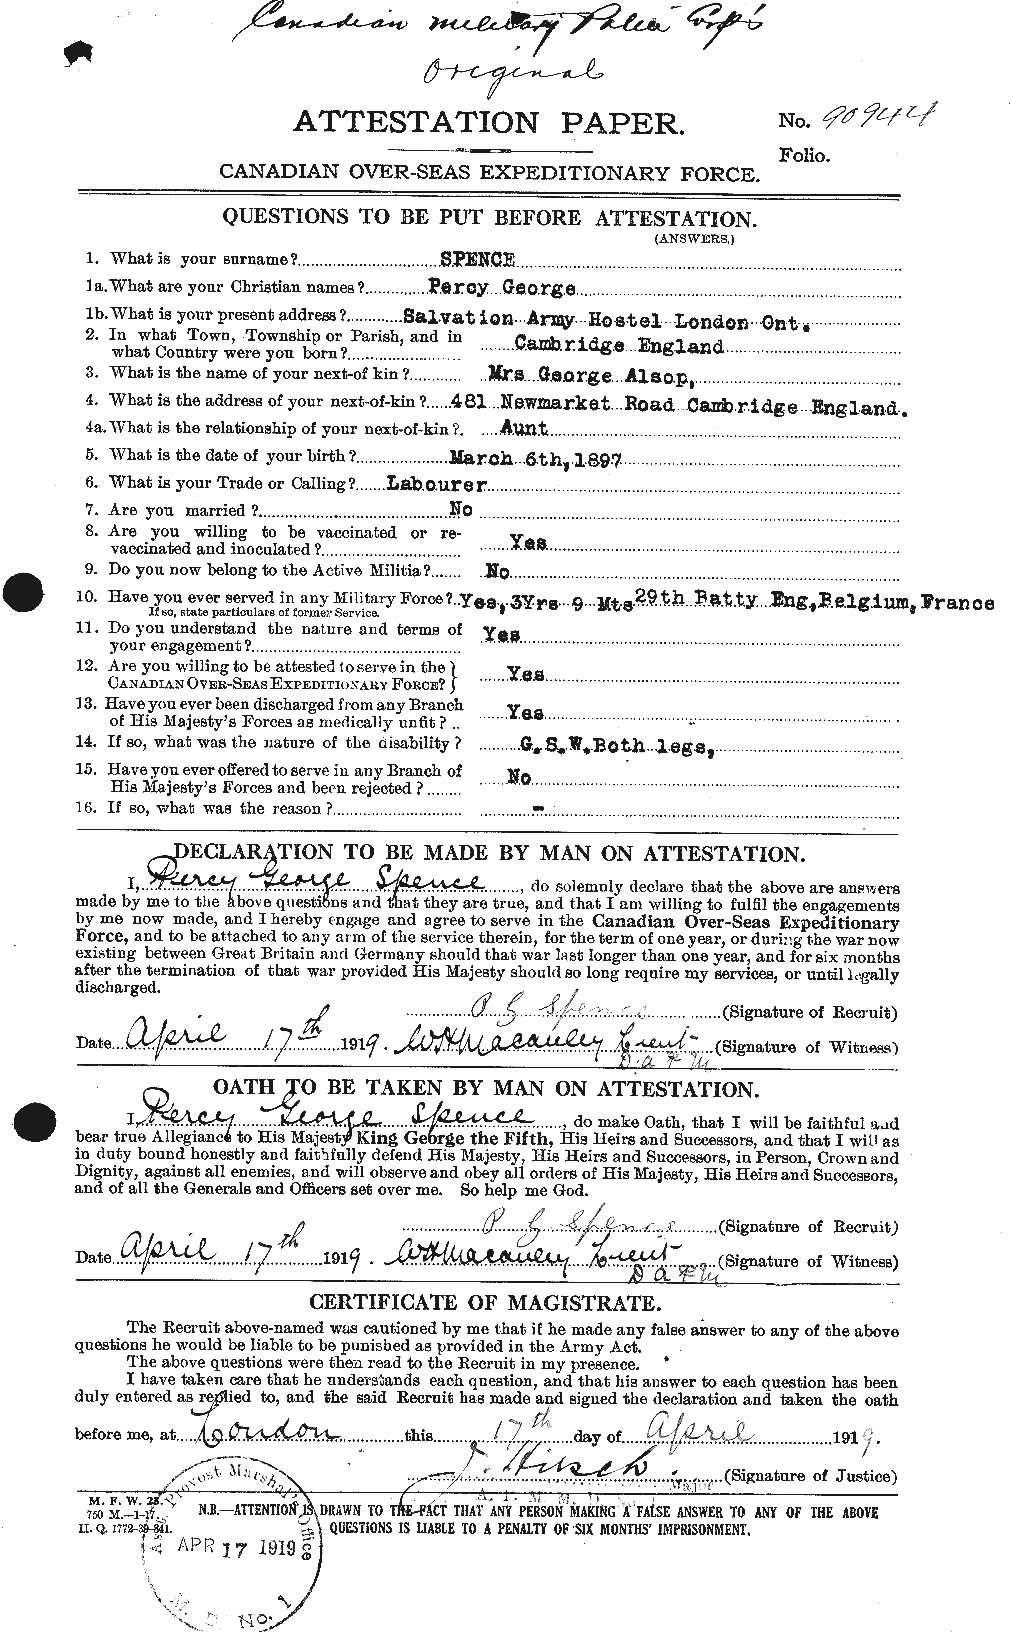 Personnel Records of the First World War - CEF 621404a